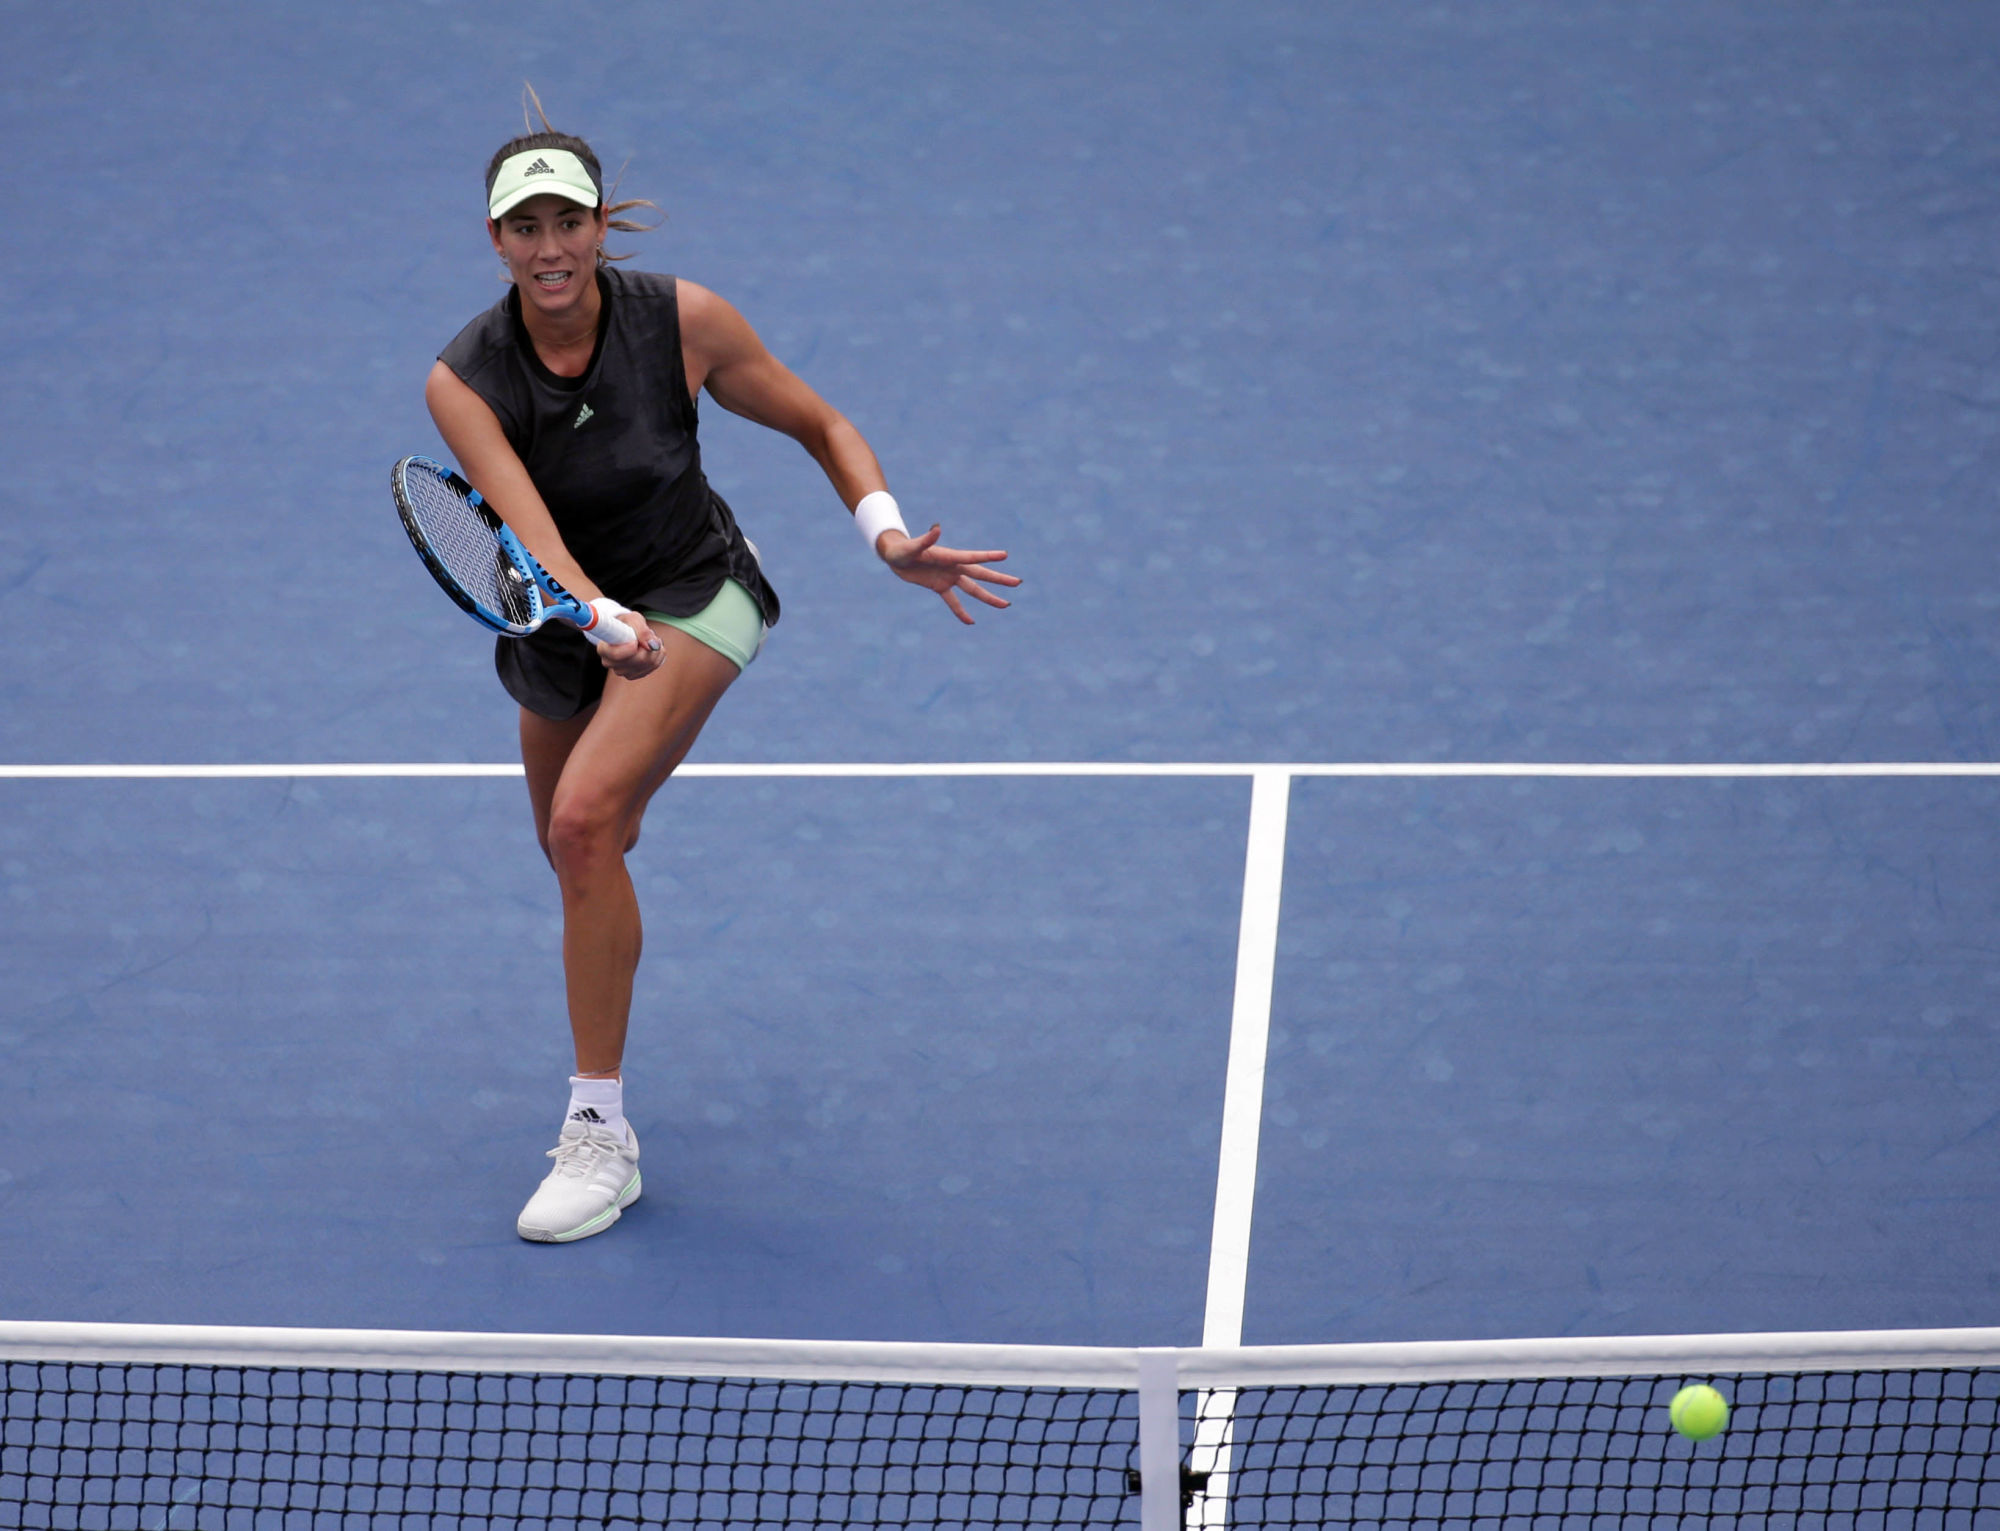 Aug 27, 2019; Flushing, NY, USA; Garbine Muguruza of Spain returns a shot against Alison Riske of the United States in a first round match on day two of the 2019 U.S. Open tennis tournament at USTA Billie Jean King National Tennis Center.
Photo : SUSA / Icon Sport